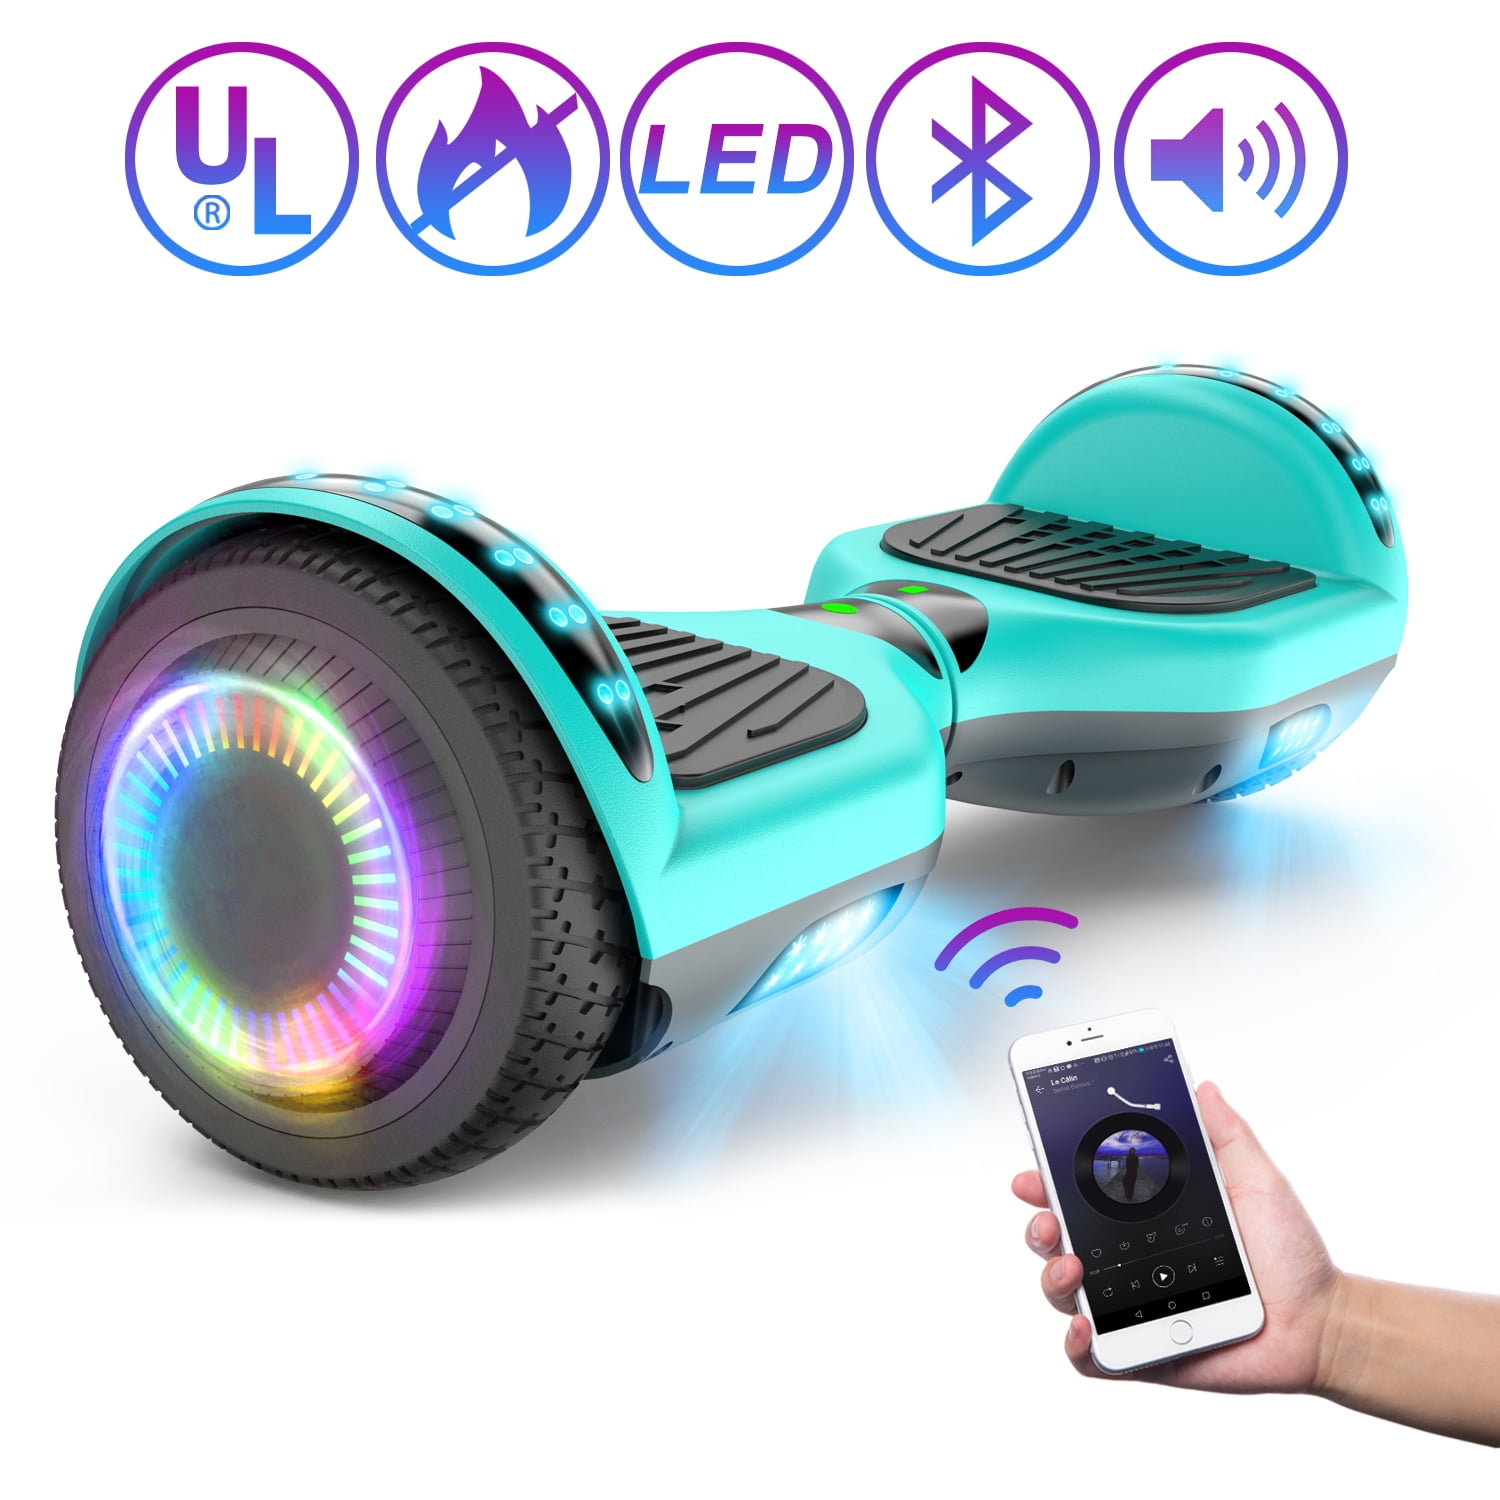 Pin by Gadgets & Gifts on hoverboard for kids  Hoverboard, Balancing  scooter, Electric scooter for kids